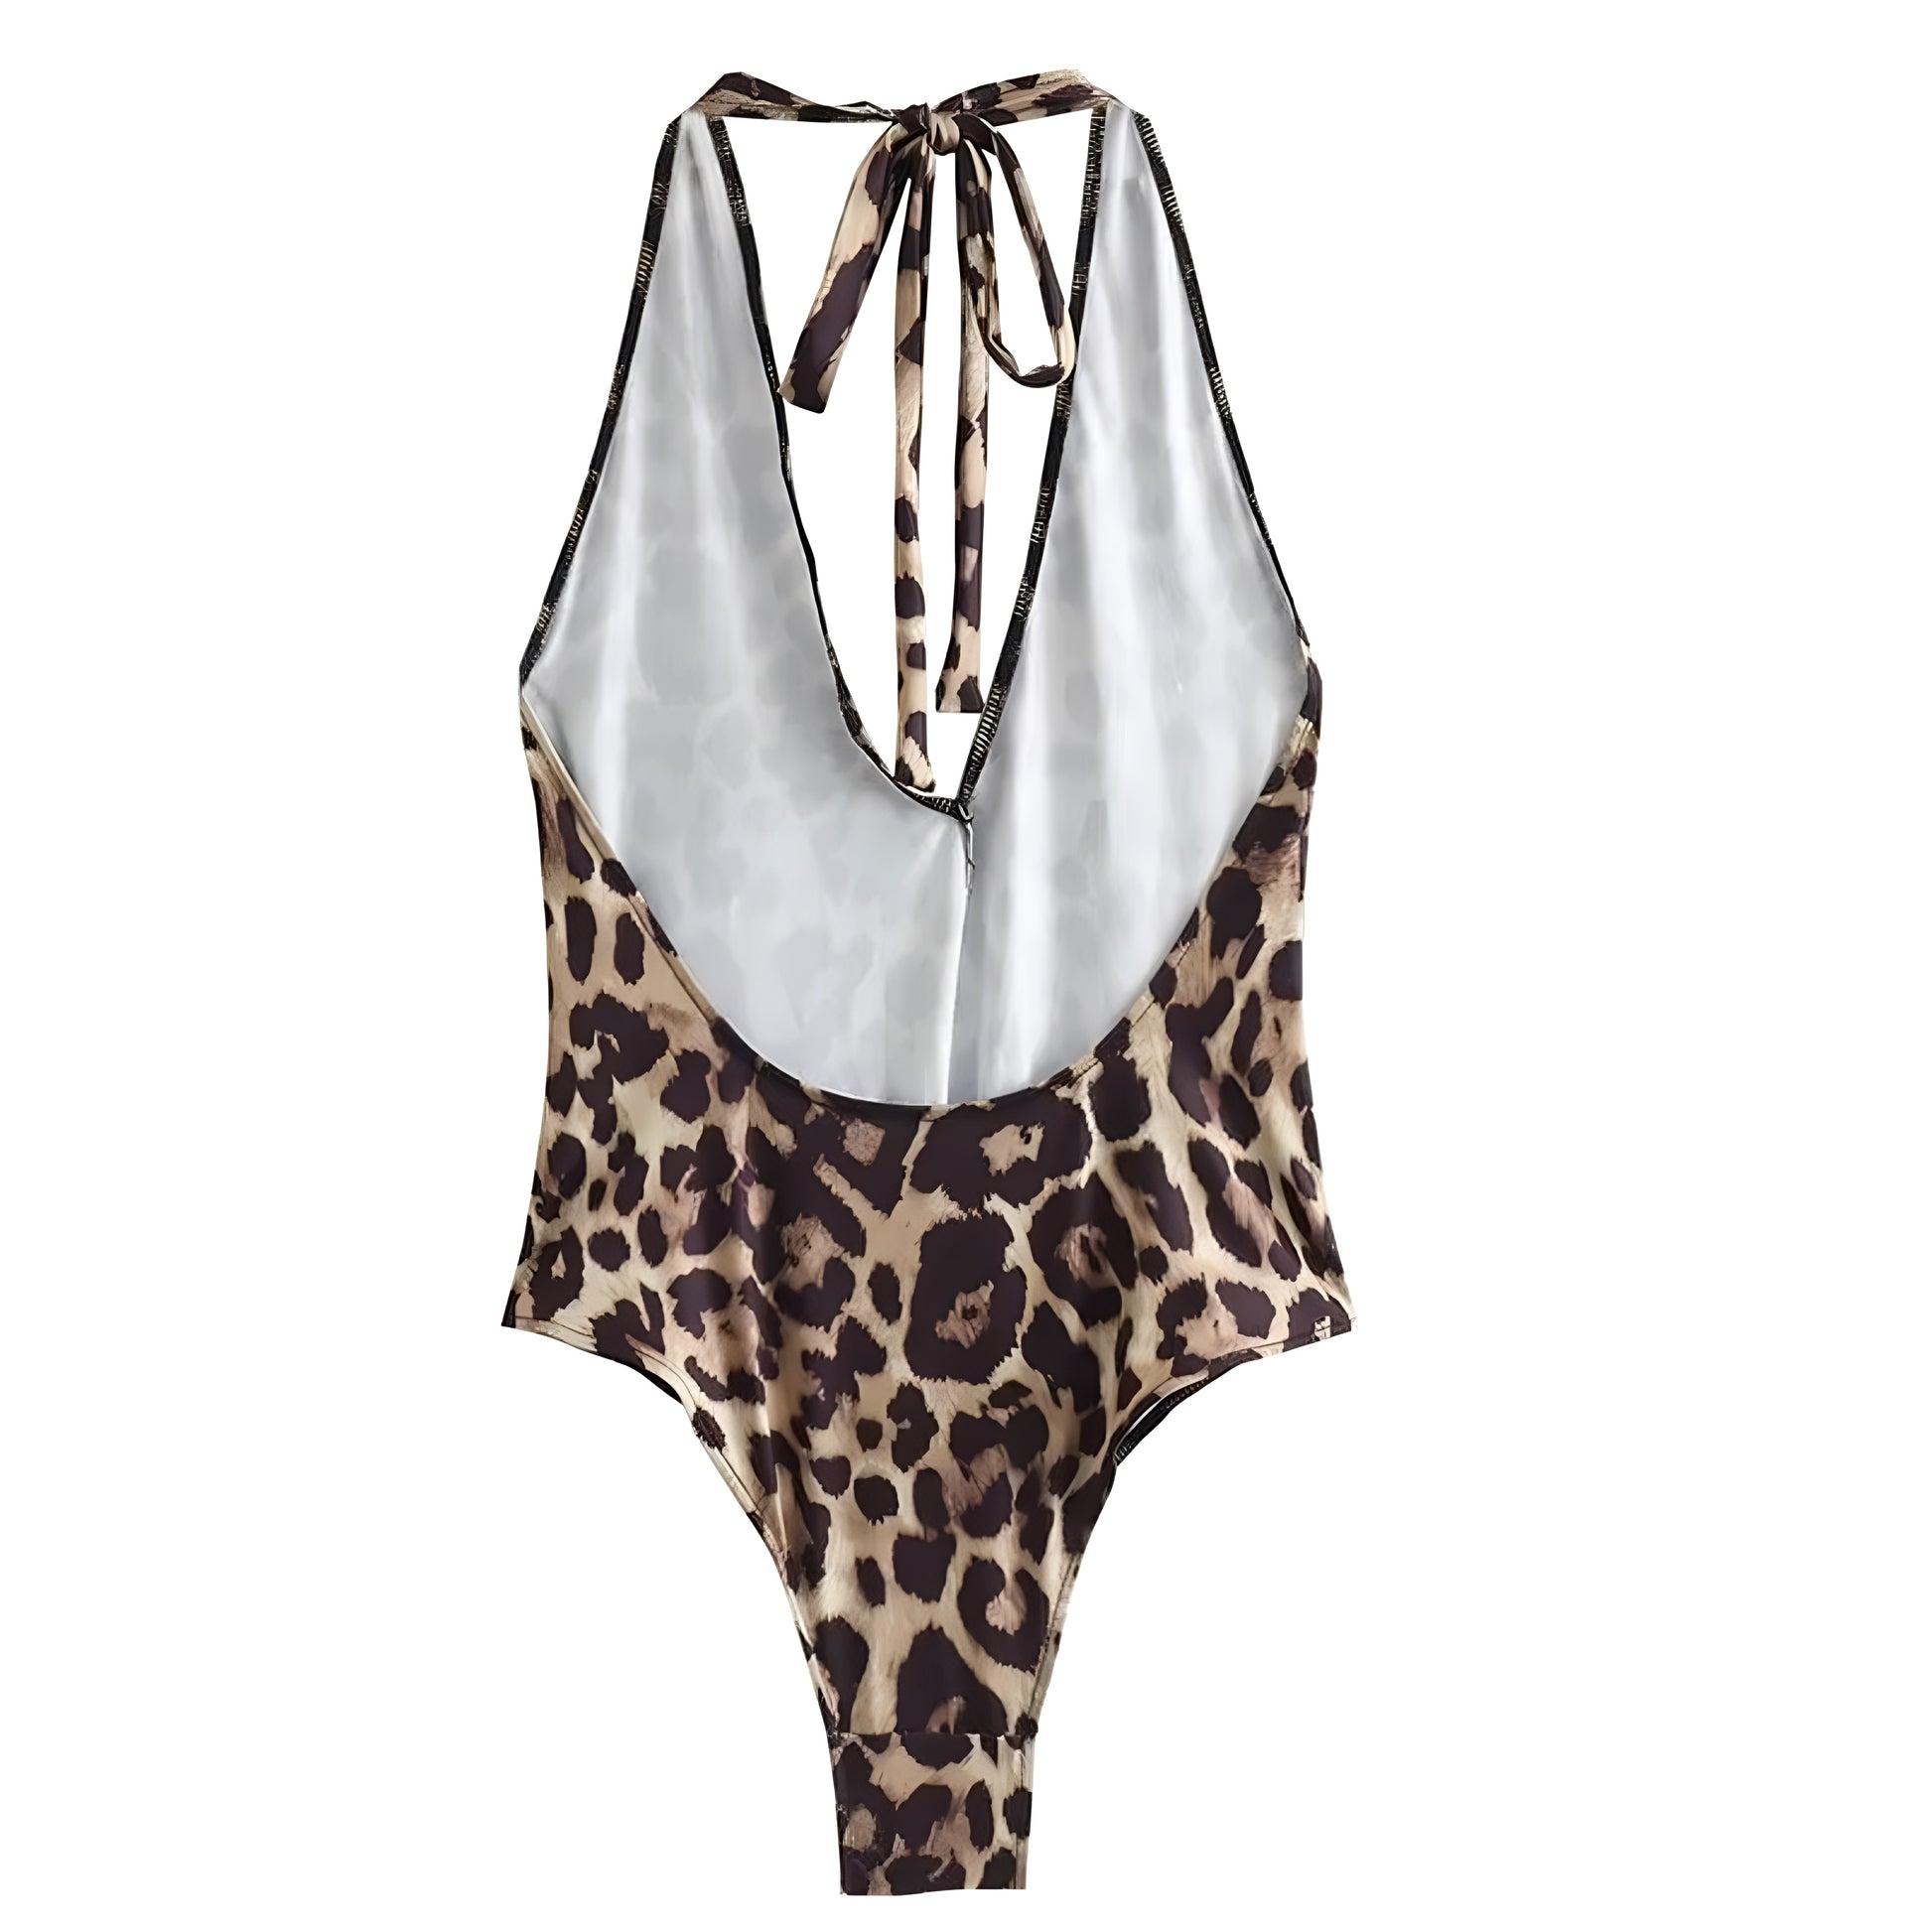 leopard-cheetah-animal-print-patterned-brown-black-multi-color-slim-fit-bodycon-fitted-waist-v-neck-sleeveless-spaghetti-strap-backless-open-back-cut-out-bow-string-tie-halter-one-piece-bodysuit-top-blouse-women-ladies-teens-chic-trendy-spring-2024-summer-elegant-casual-semi-formal-feminine-classy-y2k-brazilian-exotic-tropical-cocktail-party-club-wear-sexy-date-night-out-evening-90s-minimalist-office-siren-stockholm-style-zara-revolve-aritzia-reformation-dupe